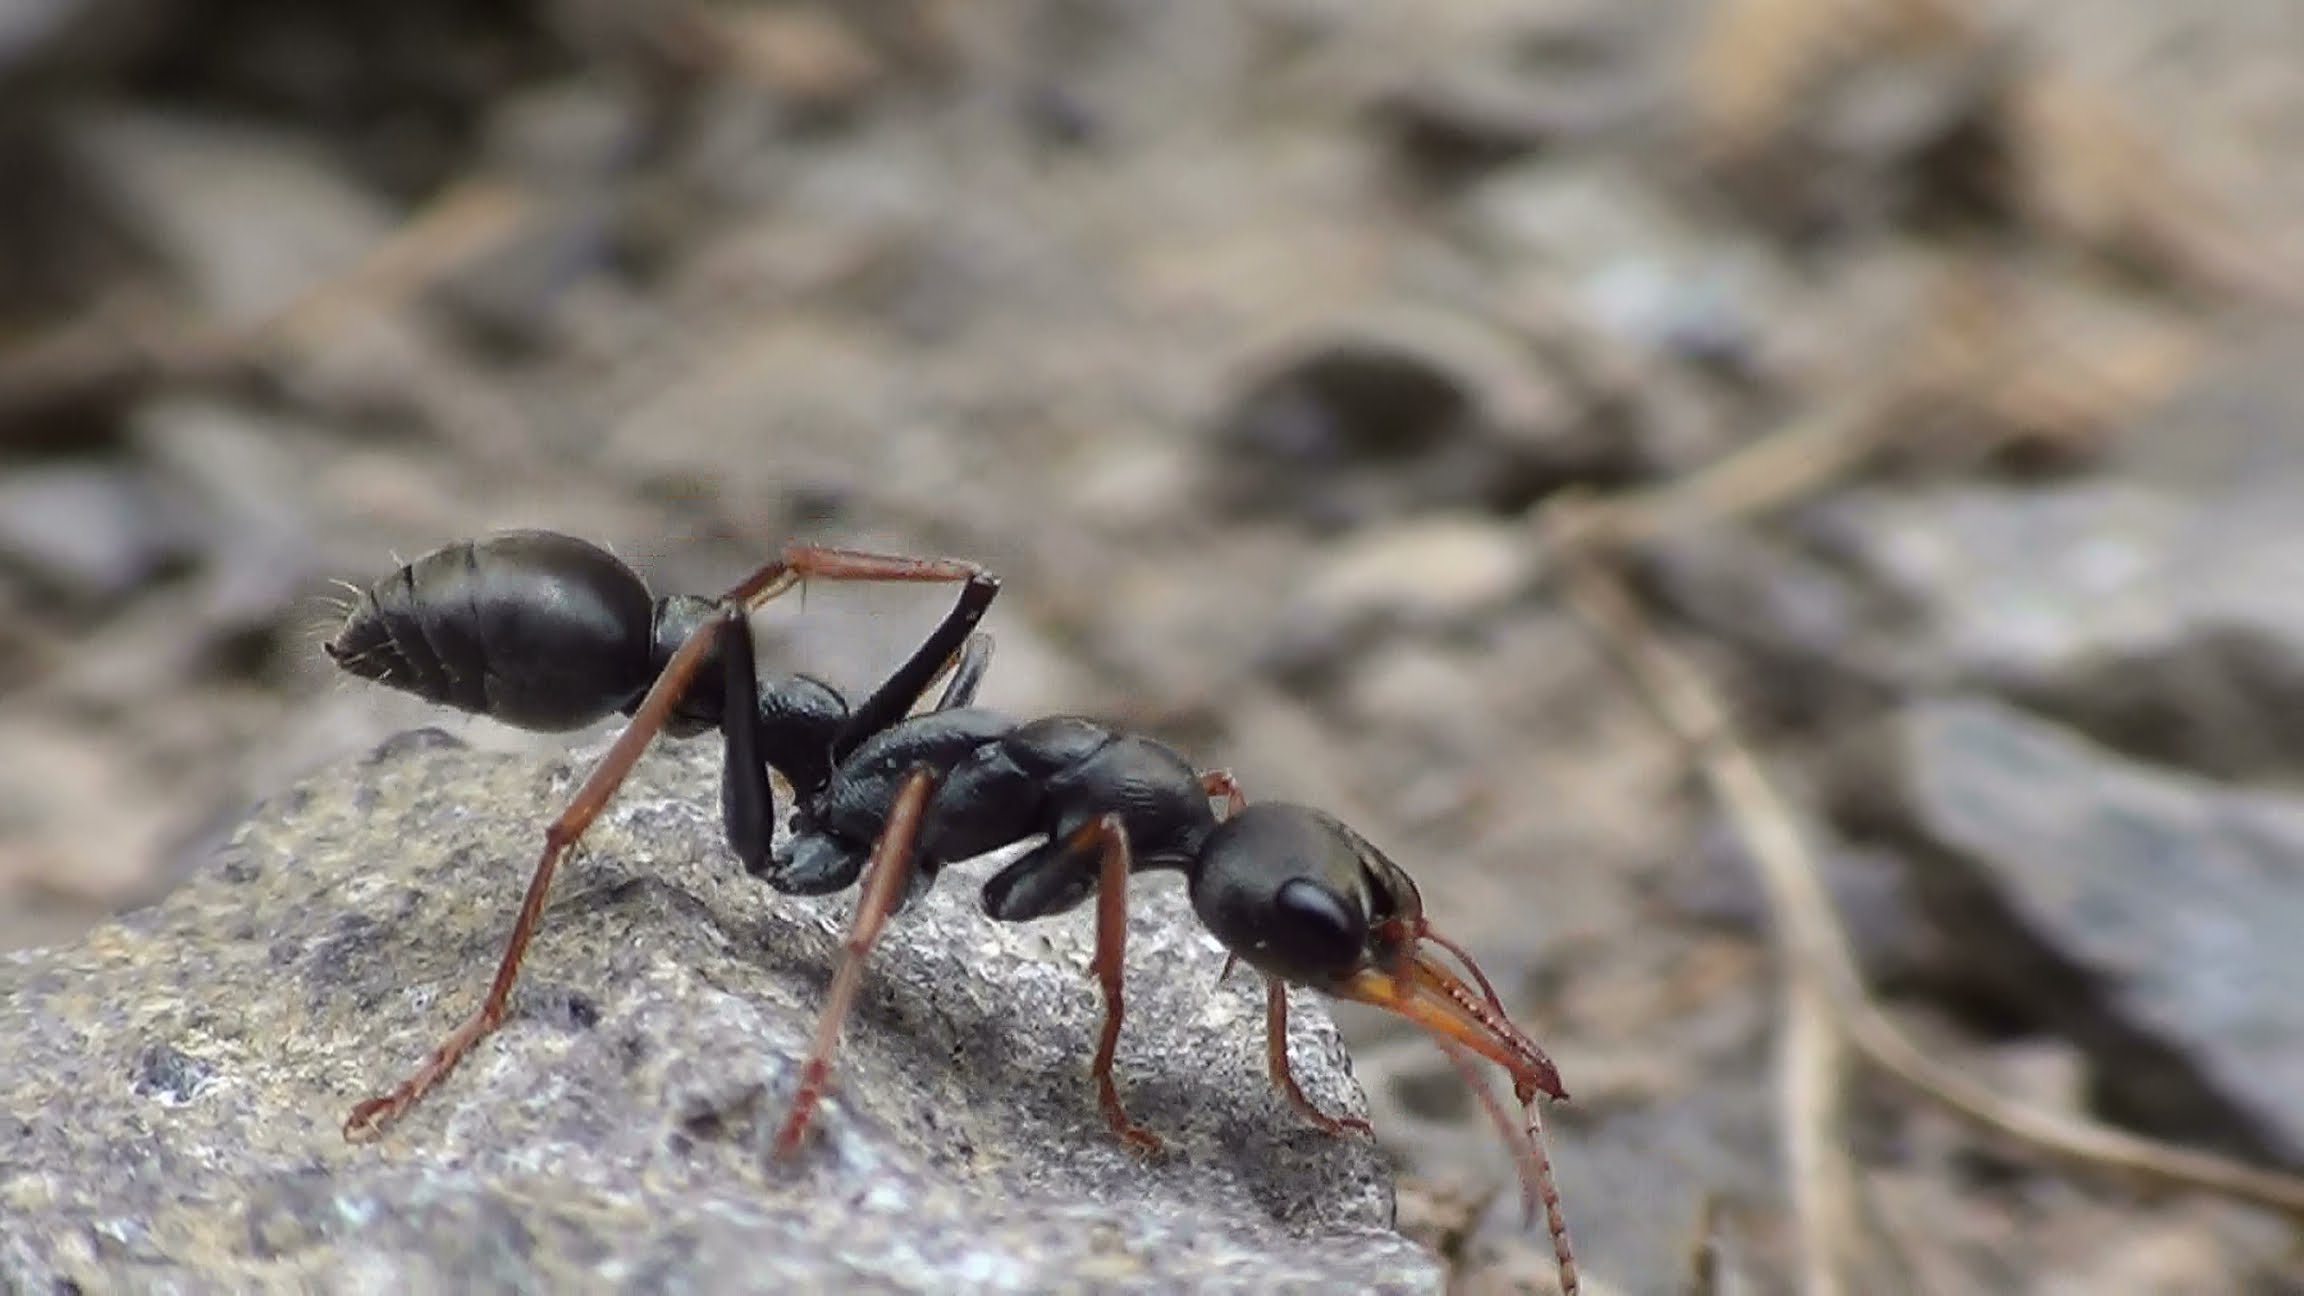 Jack Jumper Ant Nice Close Up Footage - YouTube